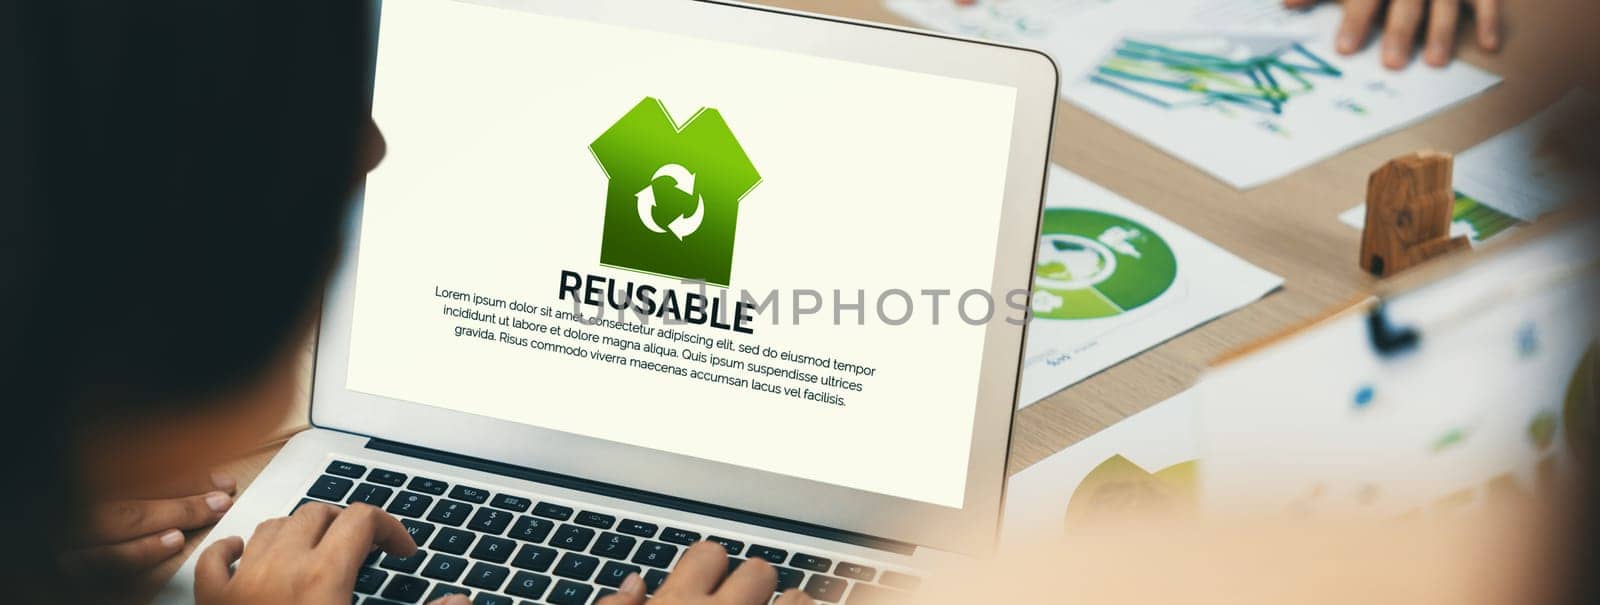 Reusable sign displayed on laptop. Eco conservative concept. Delineation by biancoblue